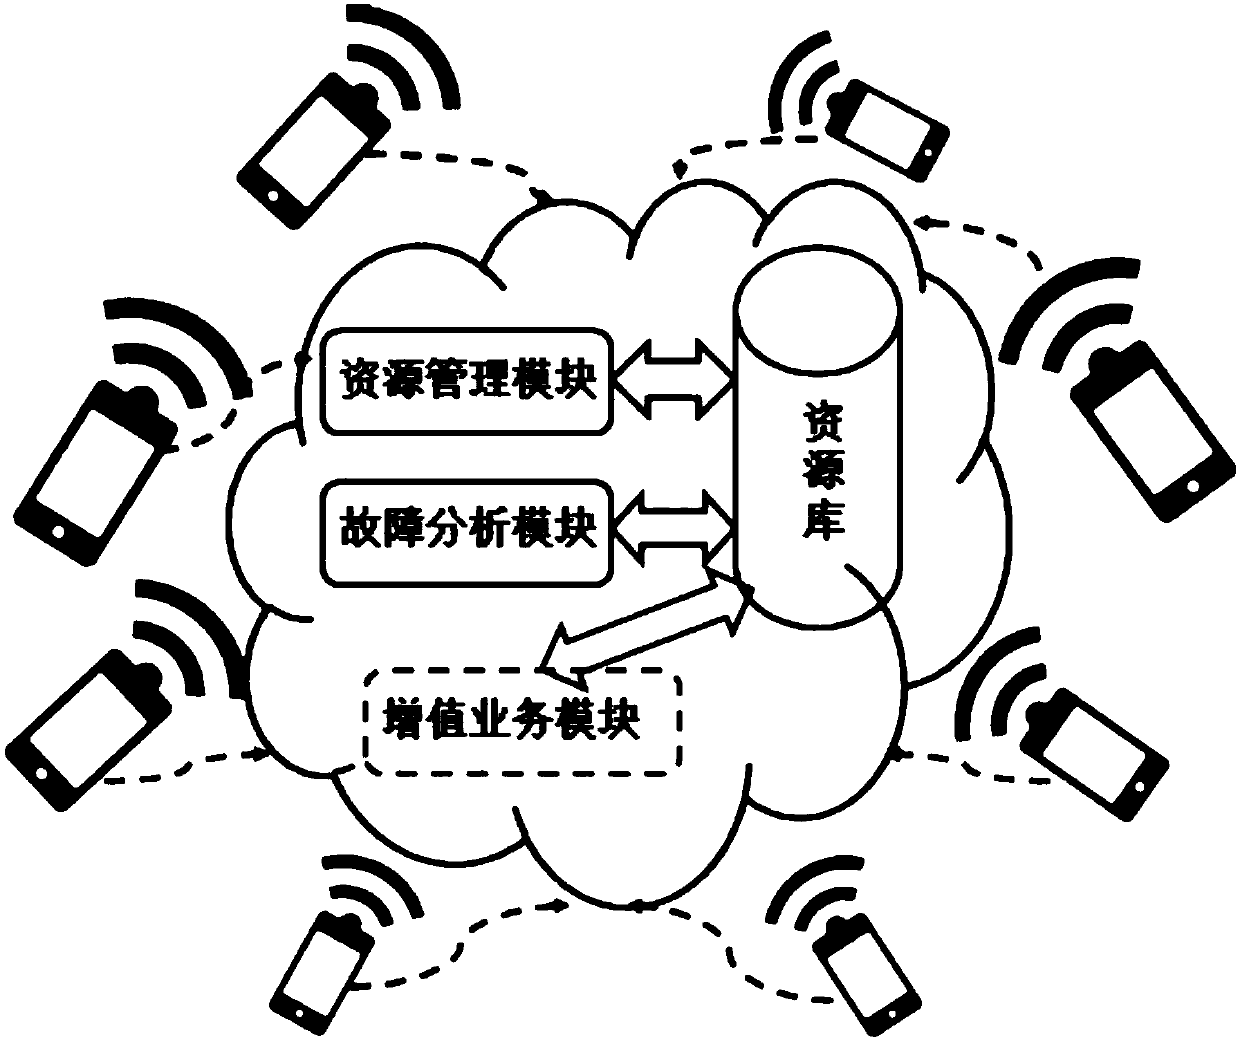 Mobile network security routing wireless network operation and maintenance system